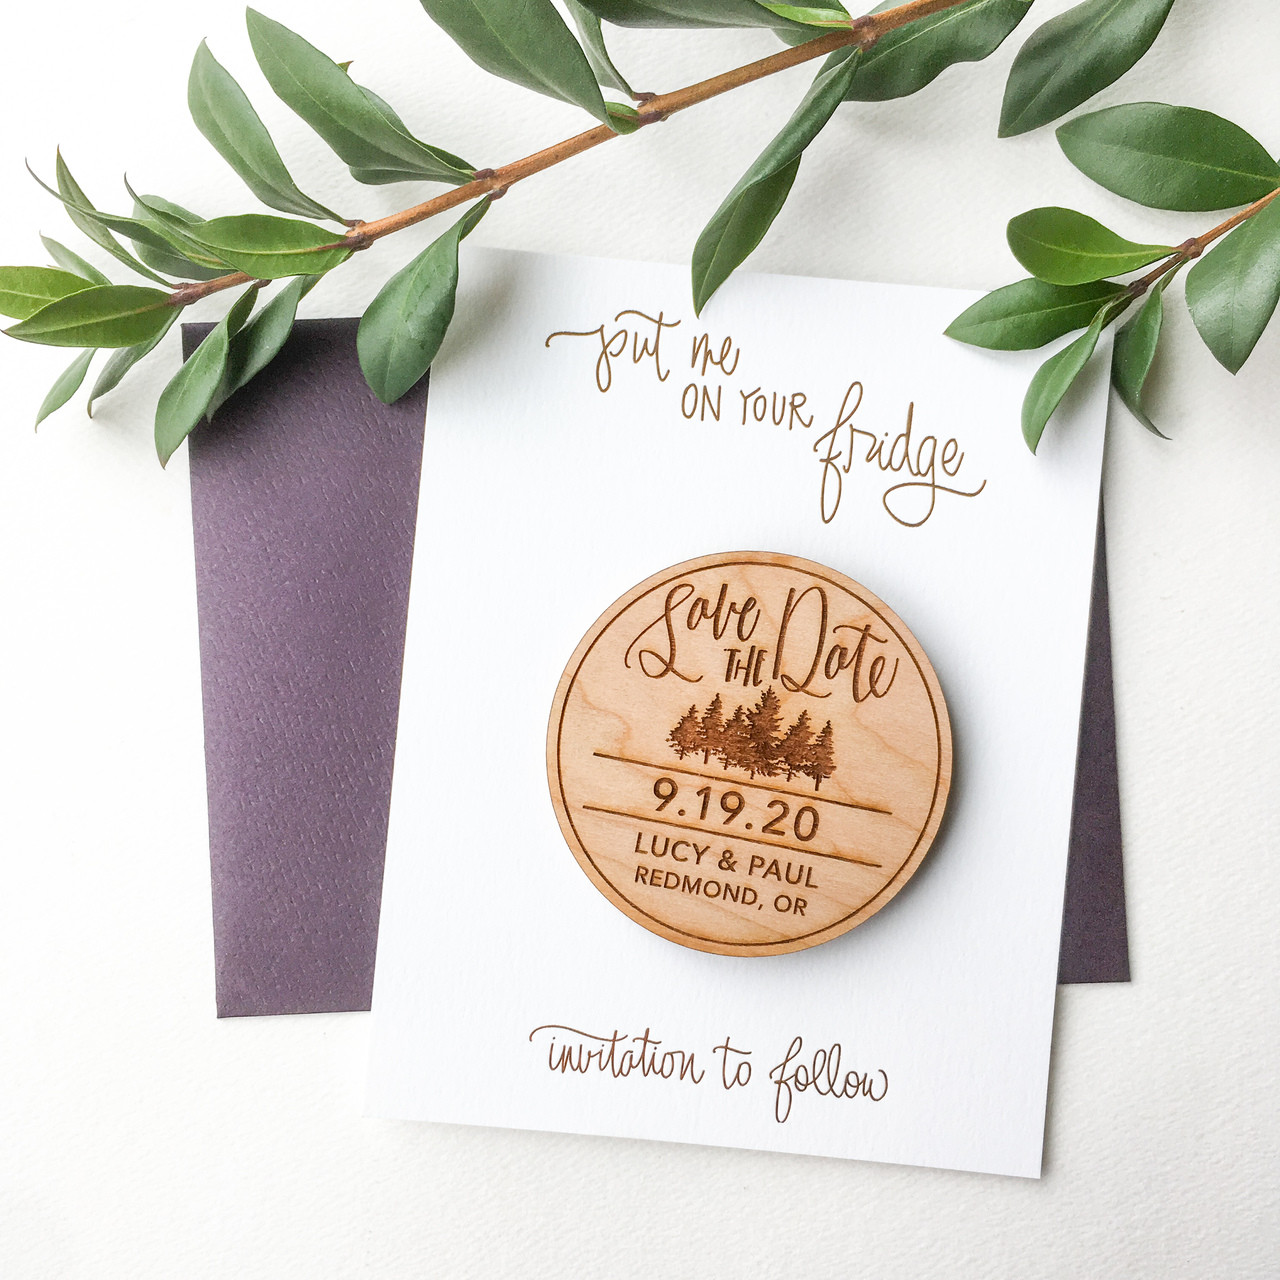 save date magnet, woodsy forest wedding save the date wood magnet